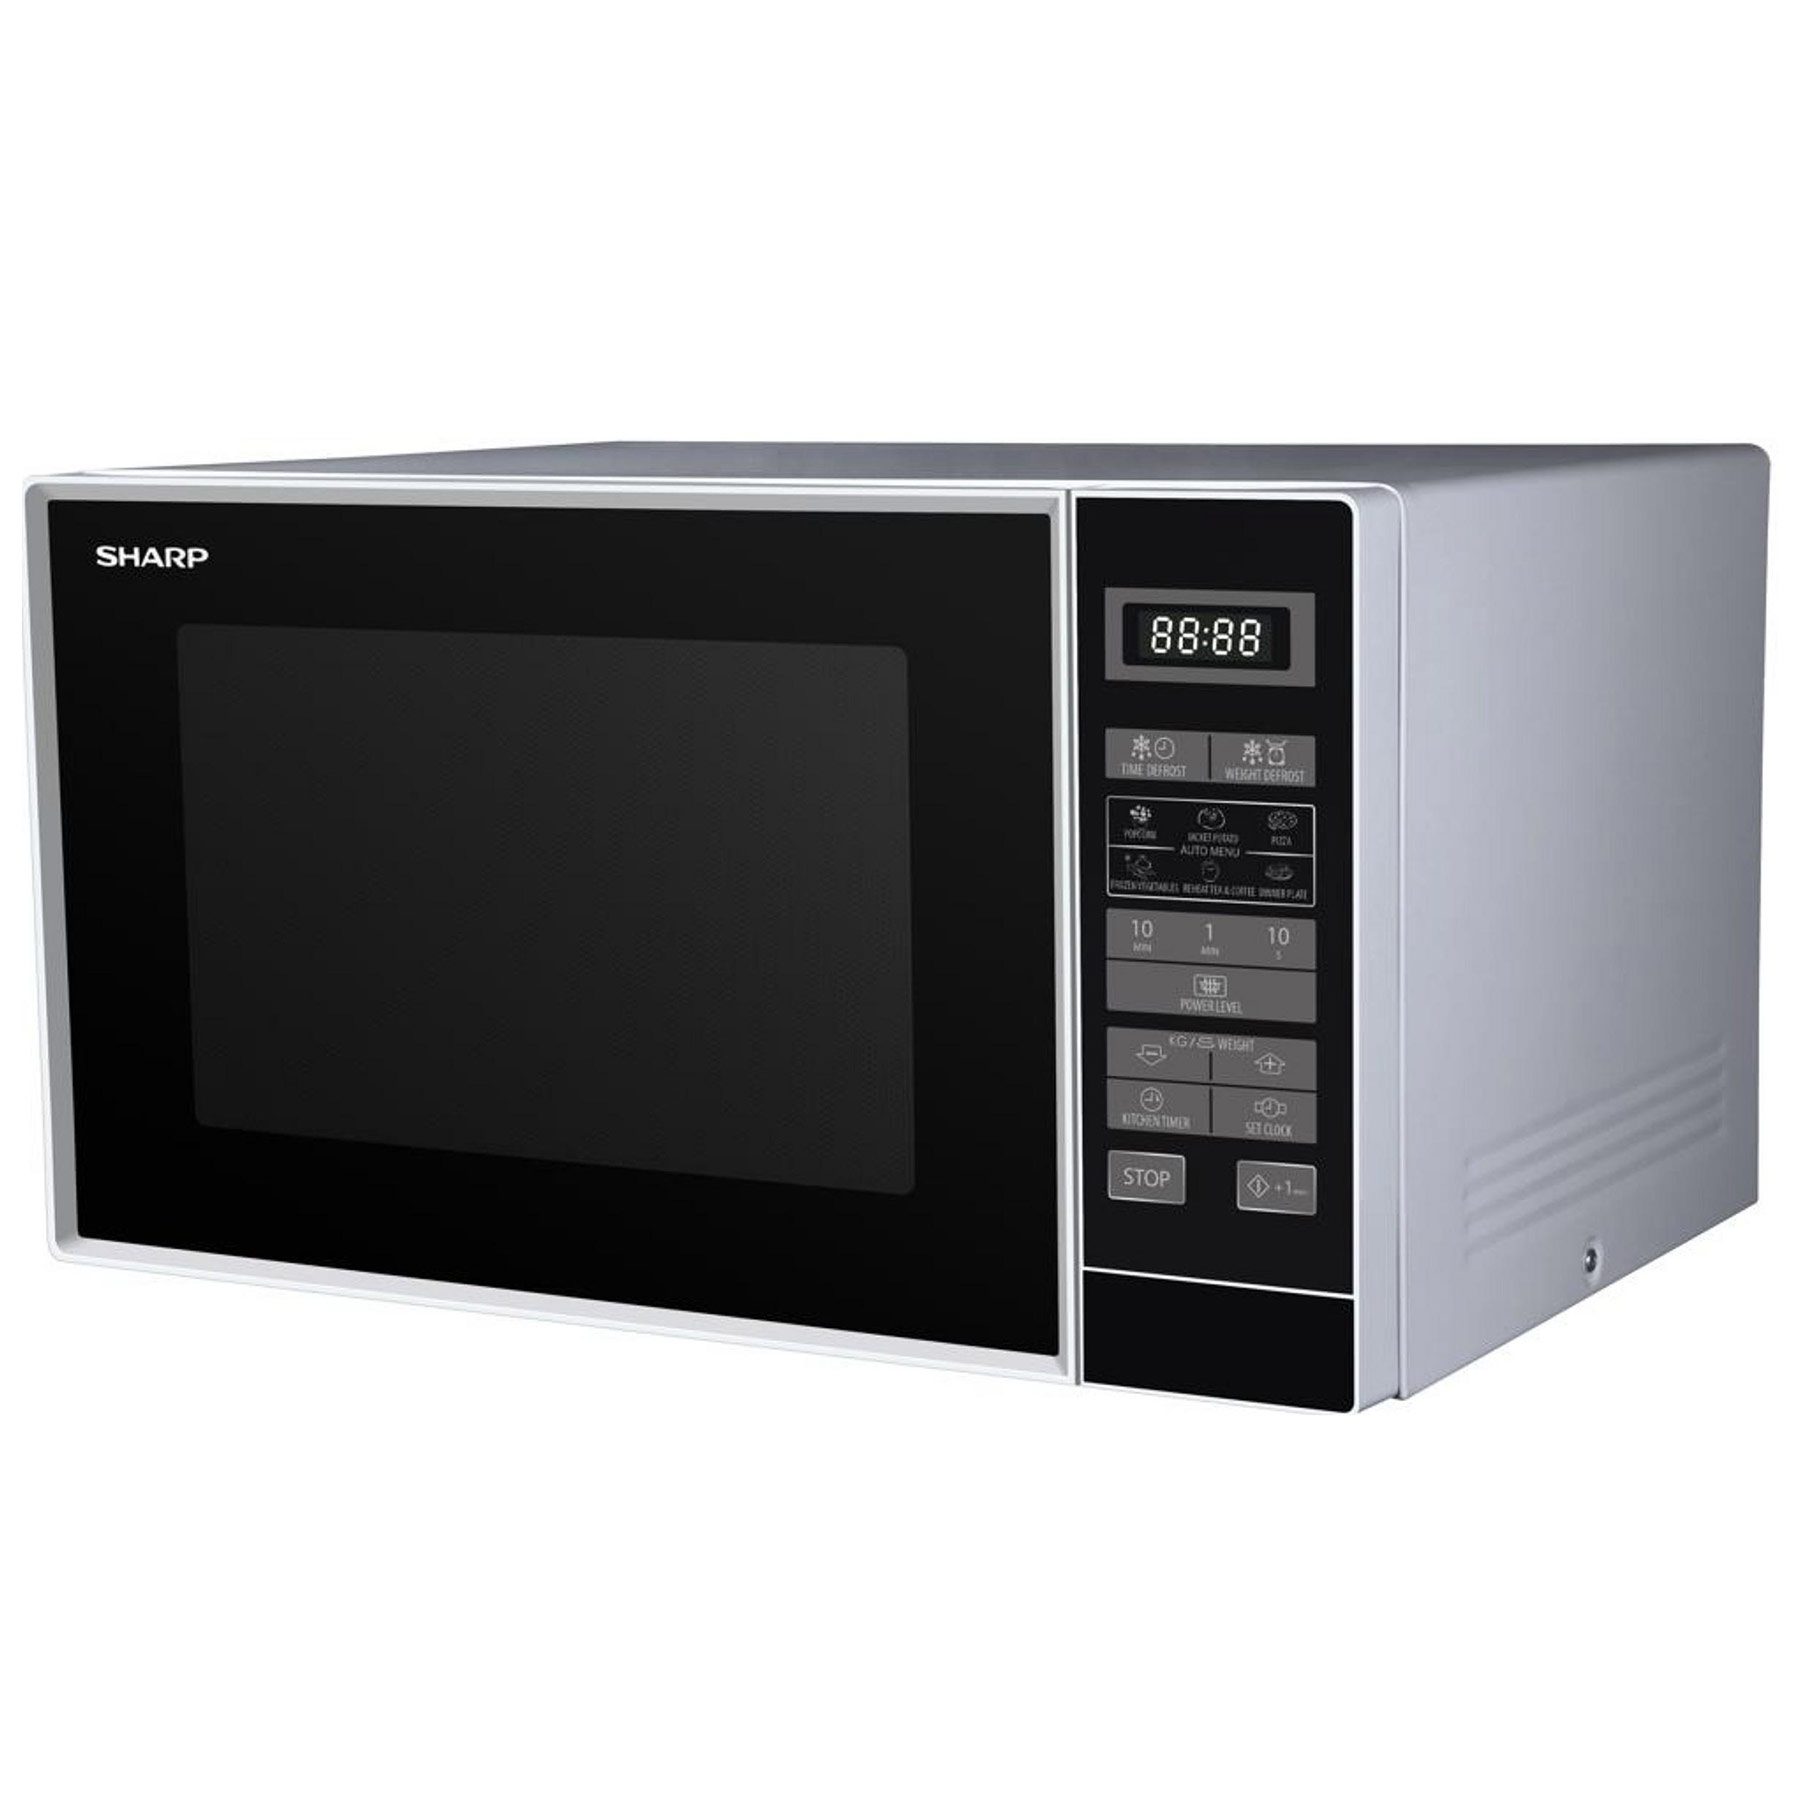 Sharp RD202TS UK Microwave Oven in Silver 25L 800W